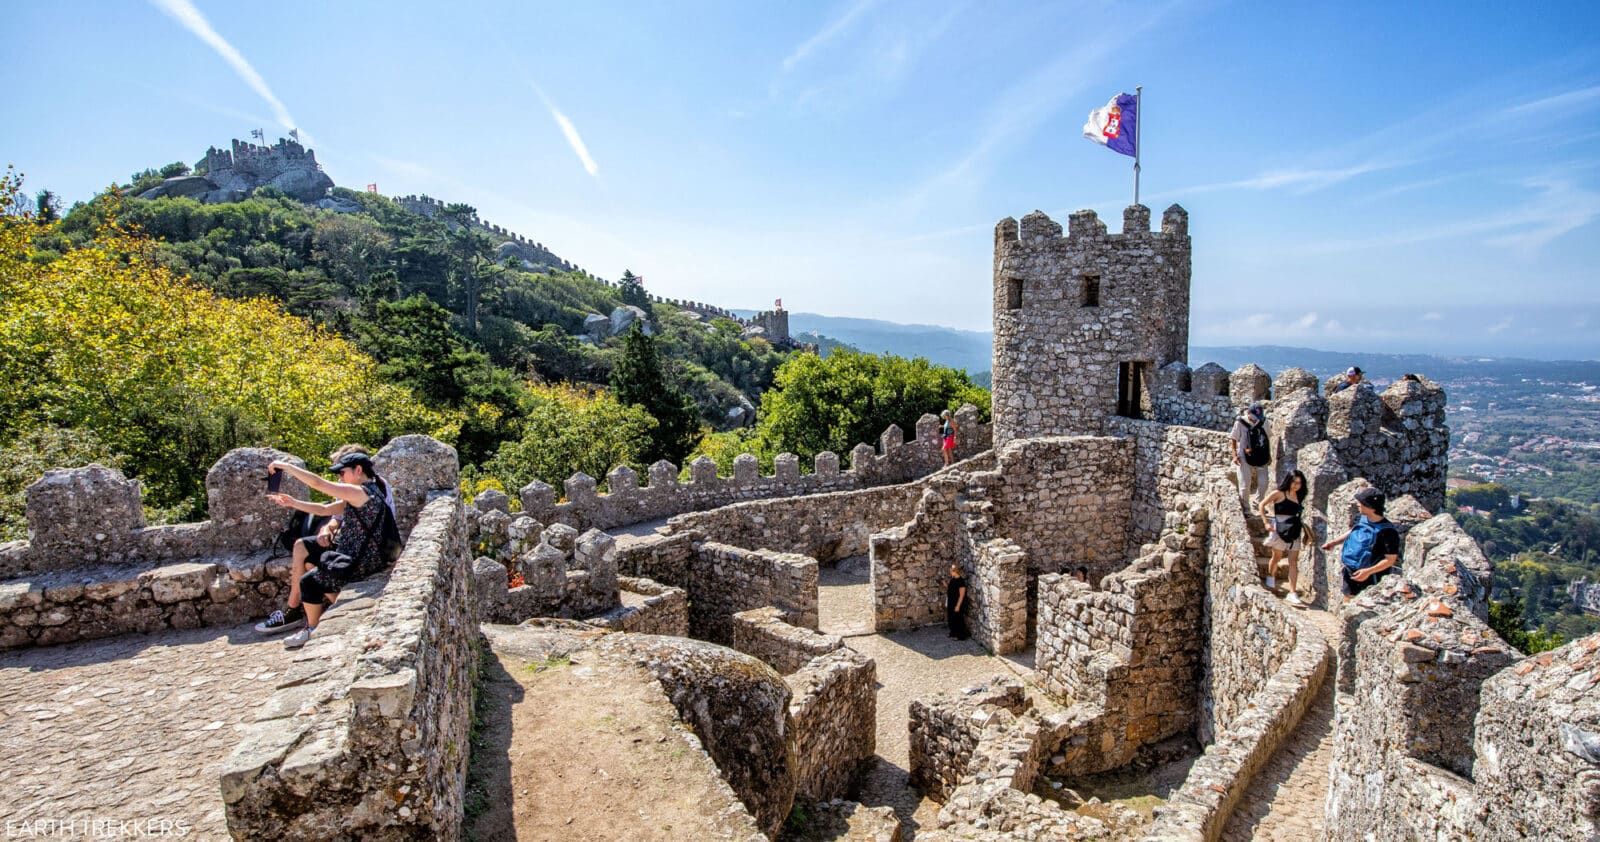 One Day in Sintra Itinerary